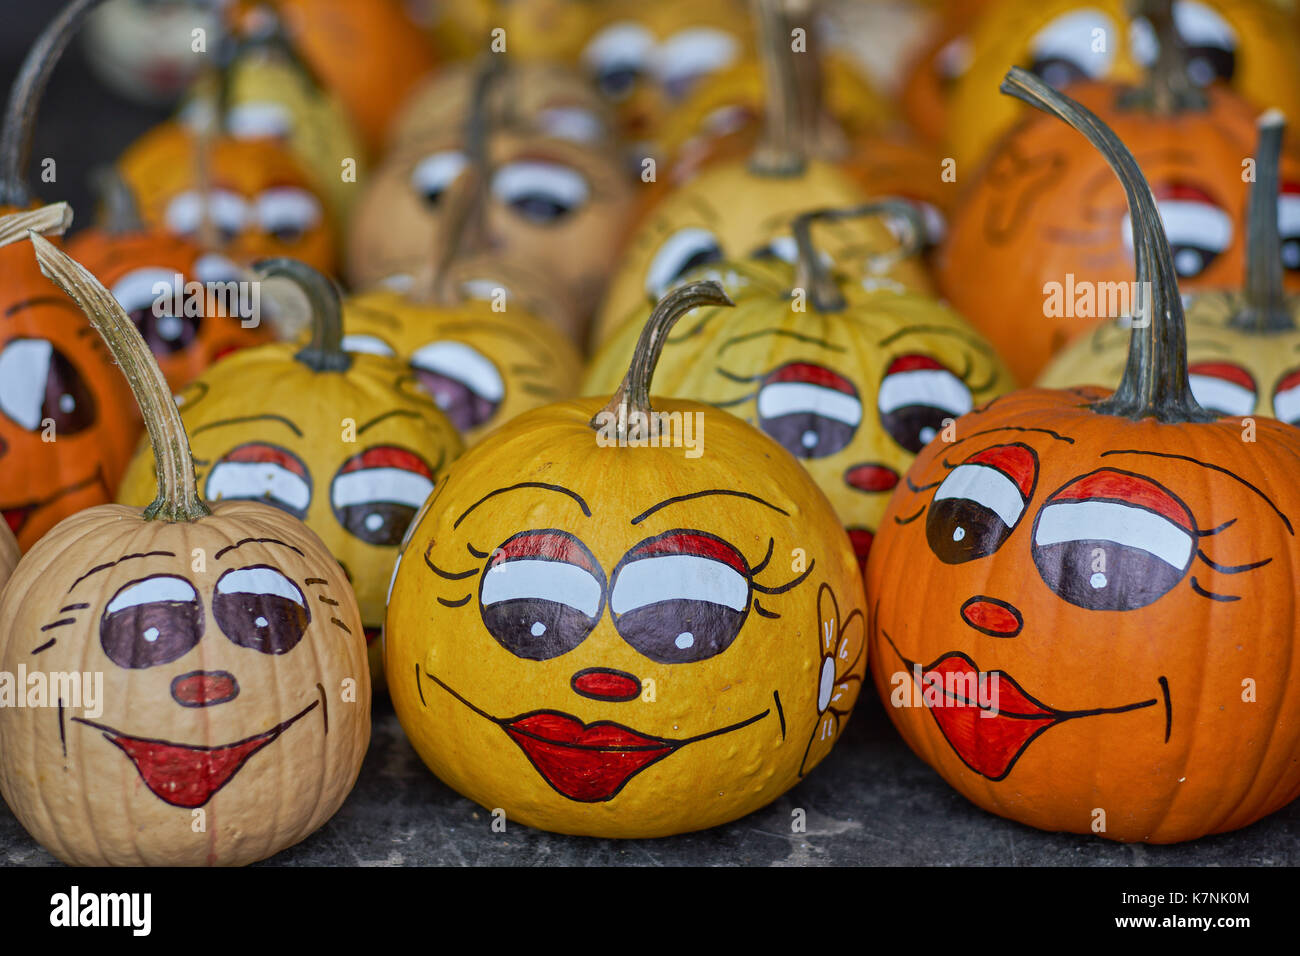 Smiling pumpkins Pumpkins with painted eyes lips nose and eyebrows many ...